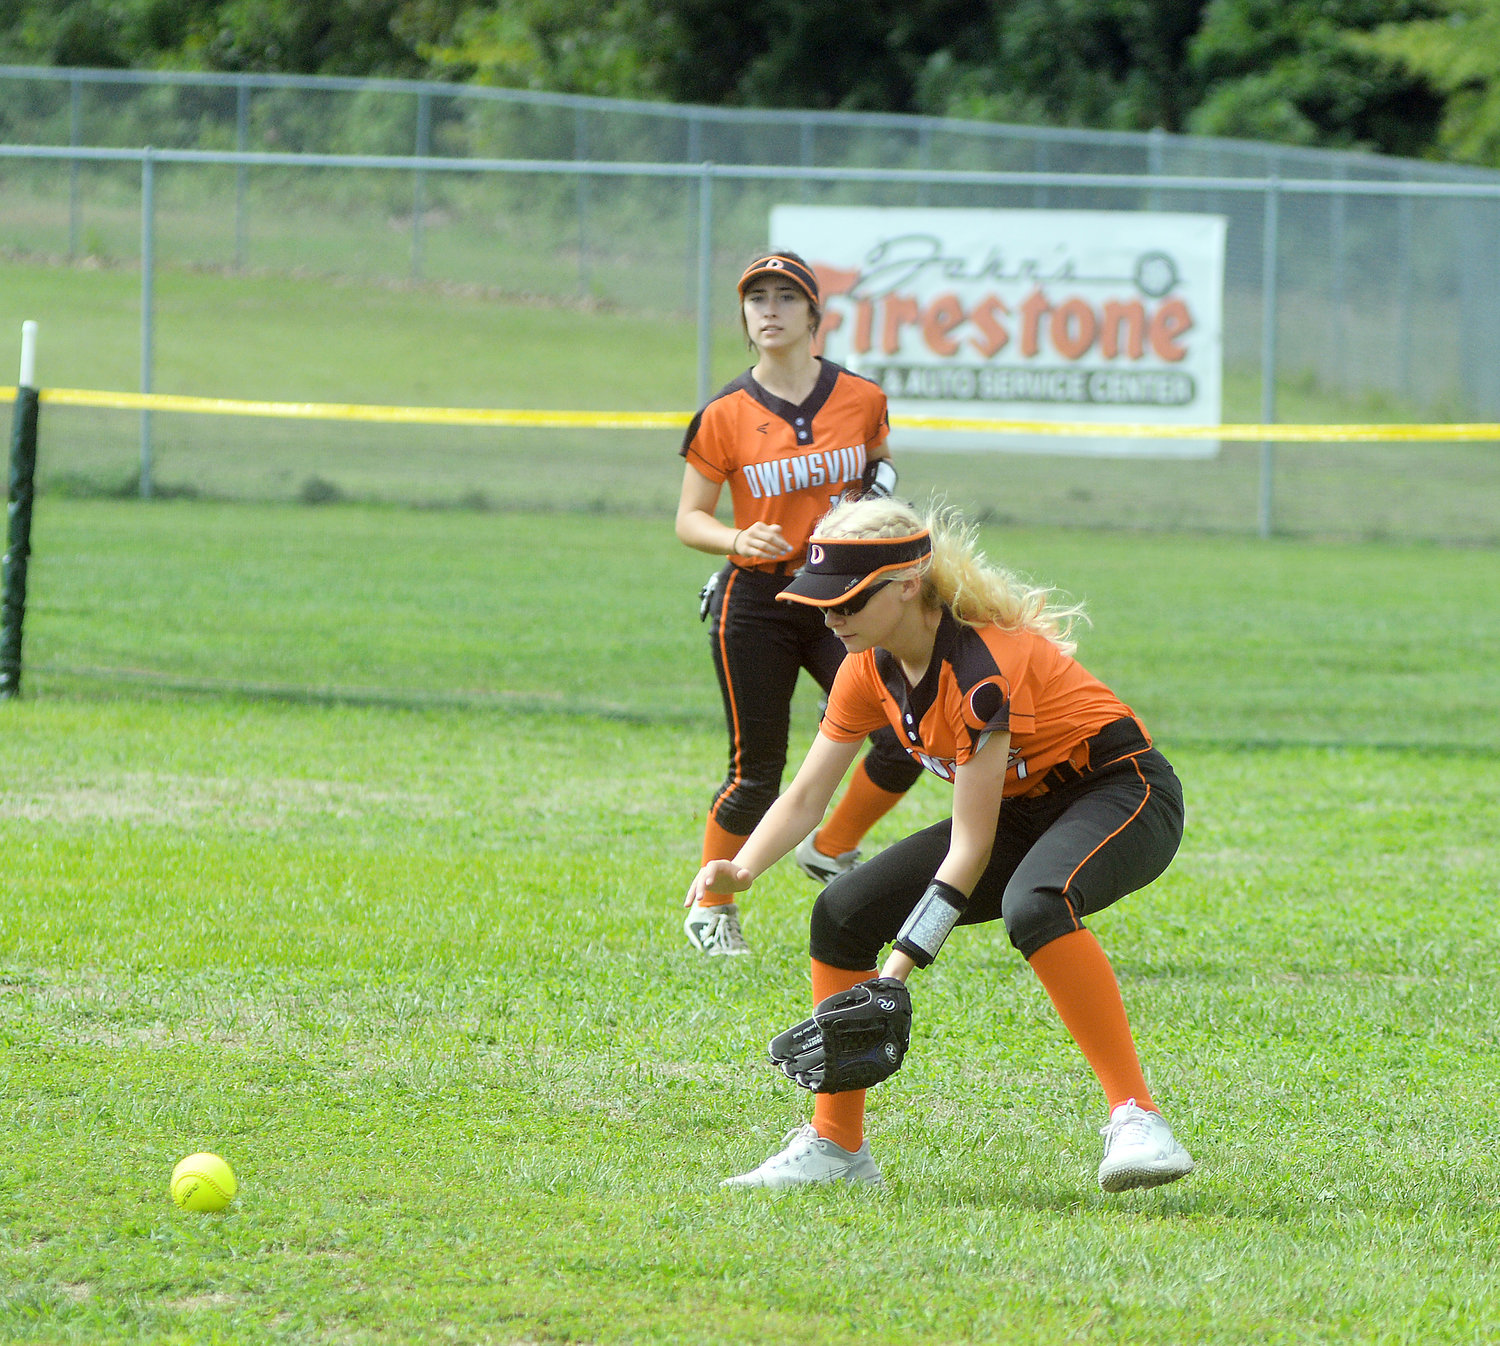 Clara Julius (far right) positions herself to field a ground ball in right field while center fielder Caidence Goodman backs her up from behind. Facing a trio of Four Rivers Conference (FRC) softball teams Saturday in St. James, the Dutchgirls defeated the host Lady Tigers, St. Clair’s Bulldogs and Hermann’s Lady Bearcats.